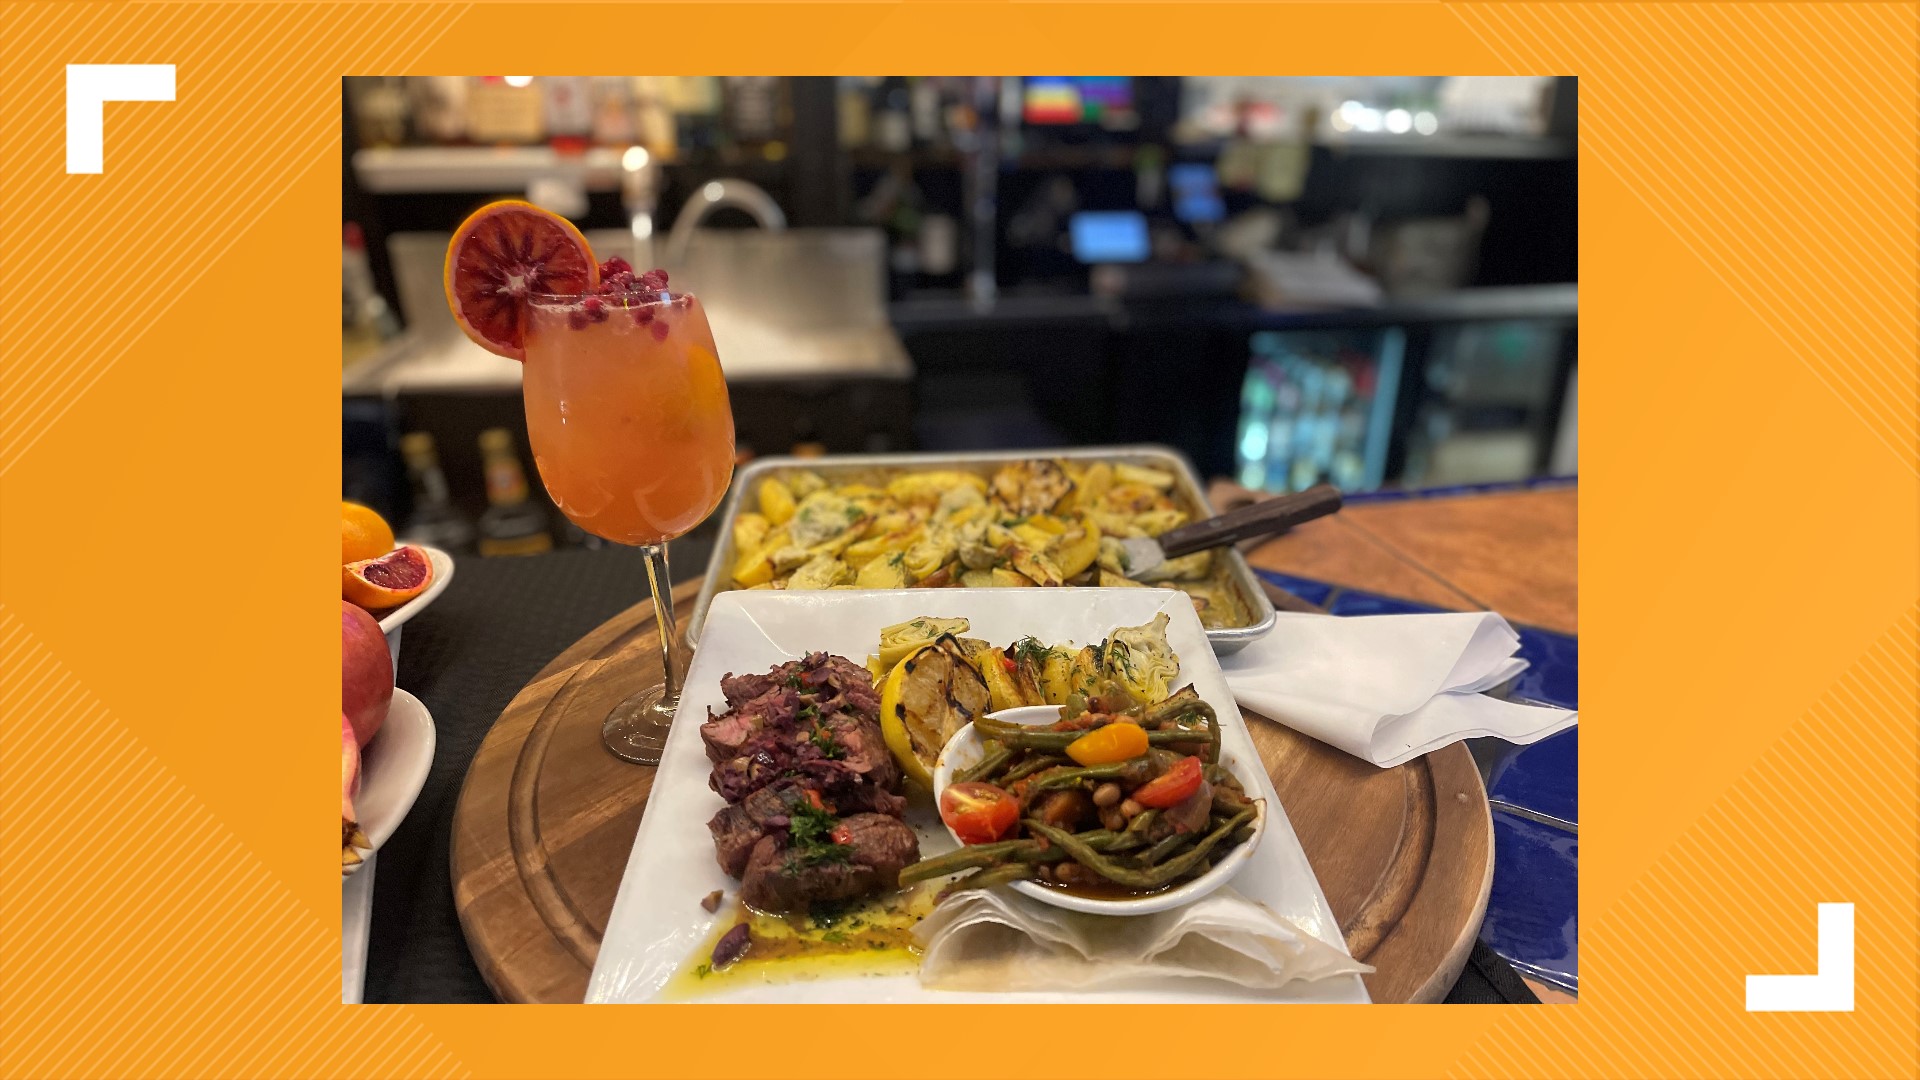 Olivia's Spartan style fire-grilled steak and blood orange champagne sangria will start off your new year with a content stomach.